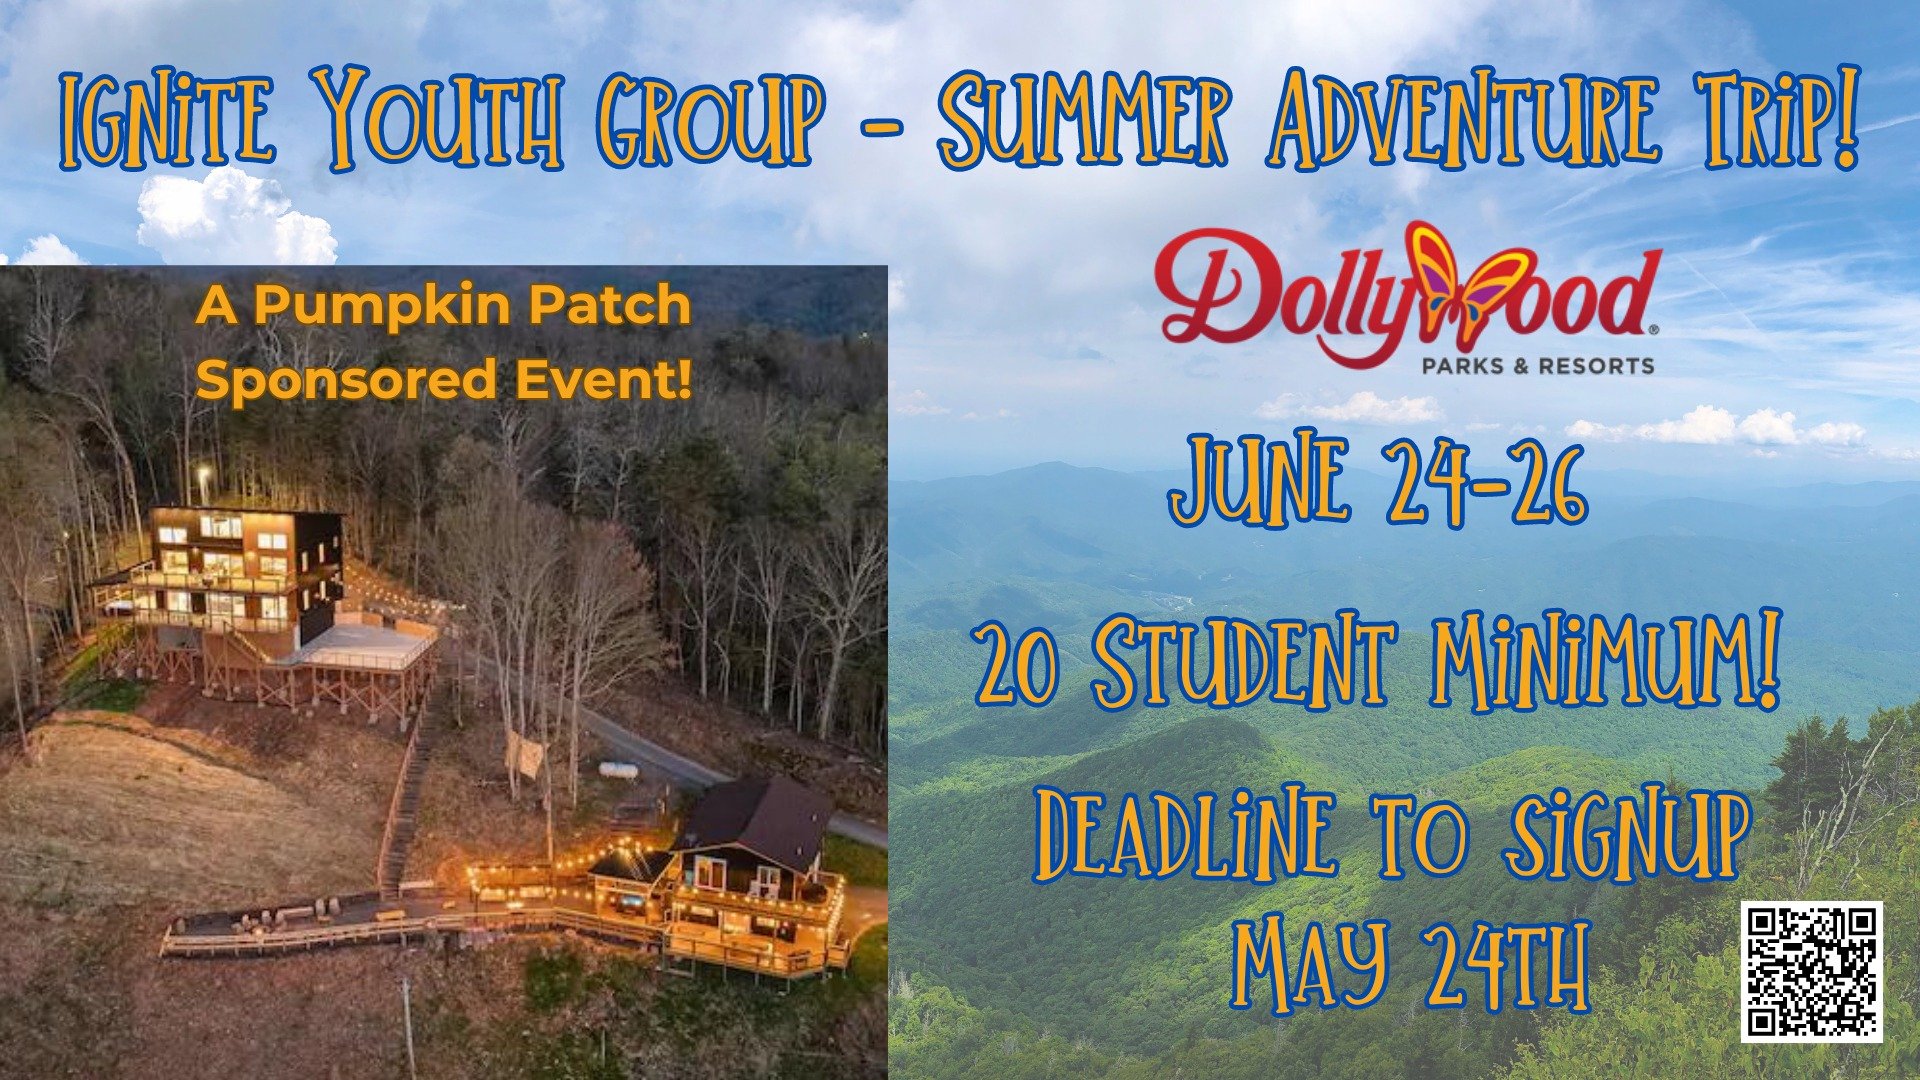 Ignite Summer Adventure Trip - Dollywood and Mountain Coasters!
June 24-26, 2024
Register on Church Center at: https://duewest.churchcenter.com/registrations/events/2297123

Come on a summer adventure with us! We will go up Monday afternoon, and stay